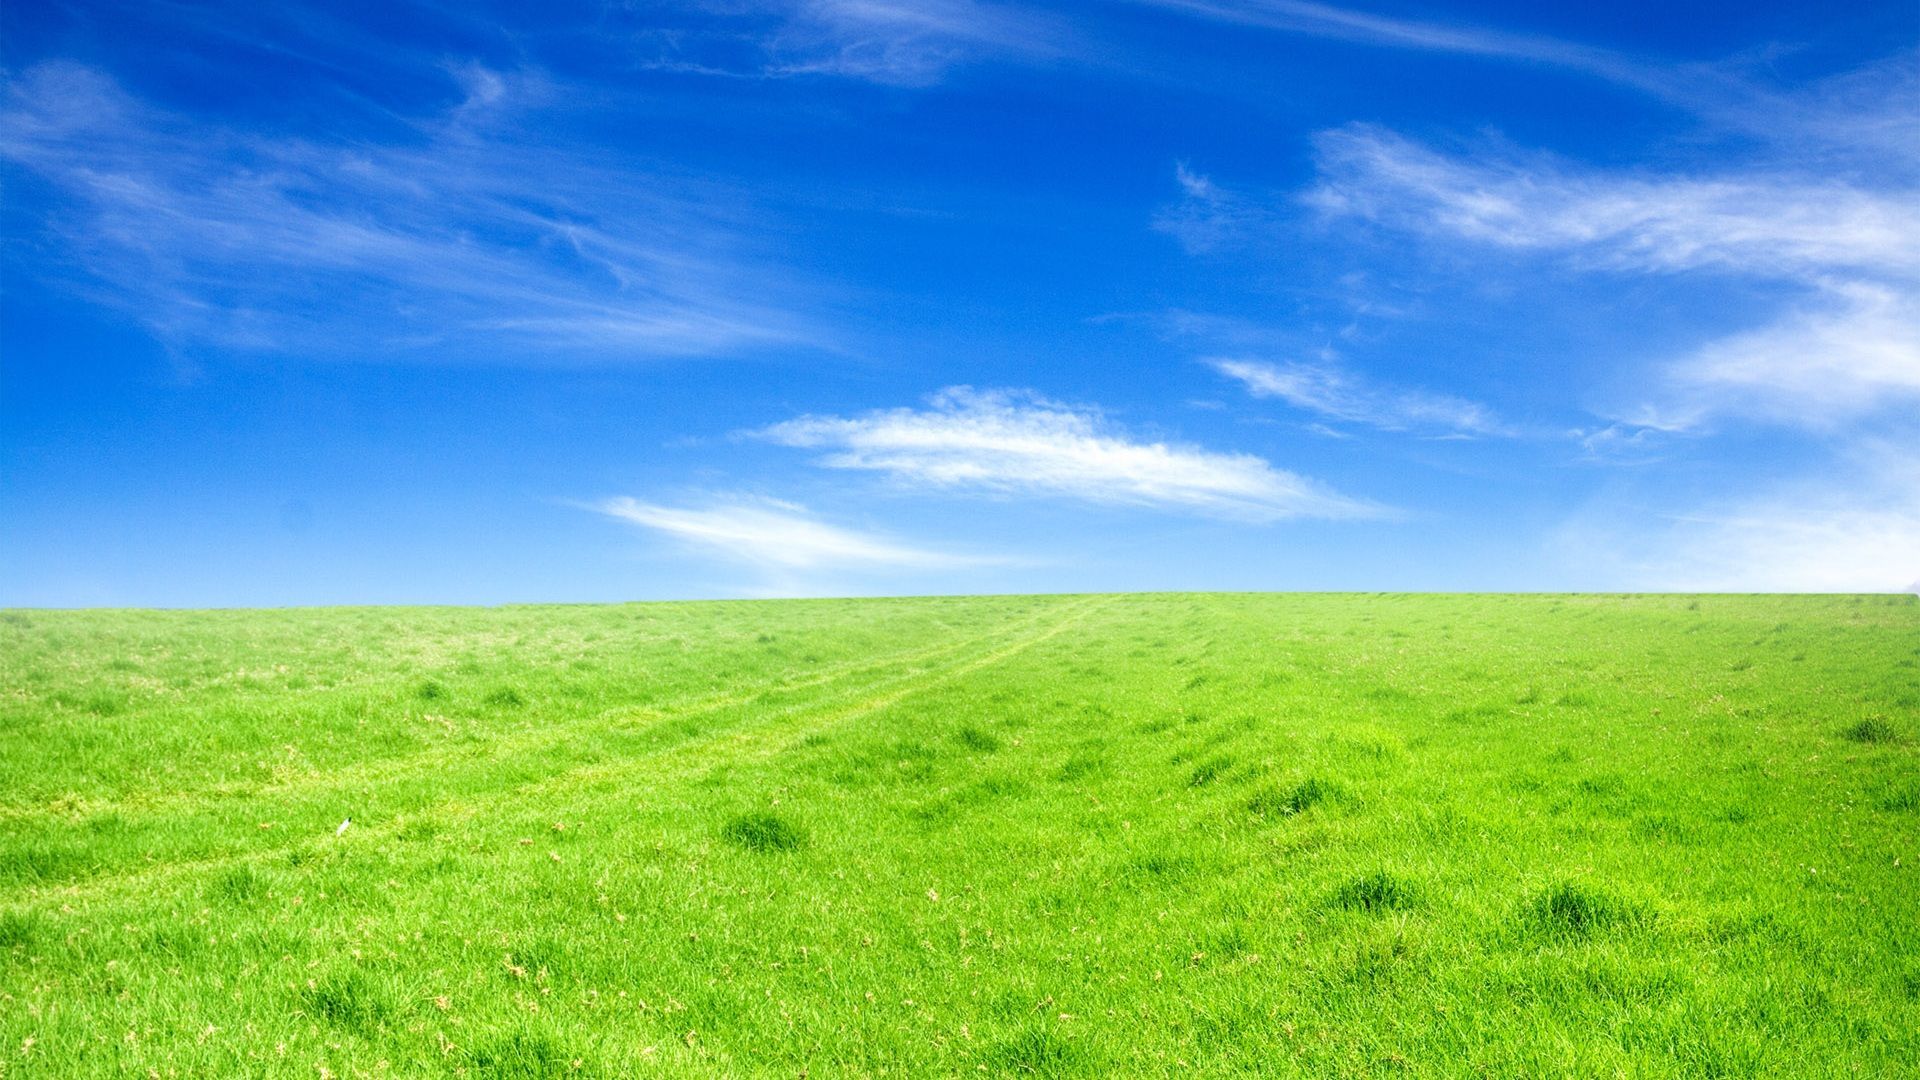 Green Grass and Blue Sky Wallpaper Free Green Grass and Blue Sky Background